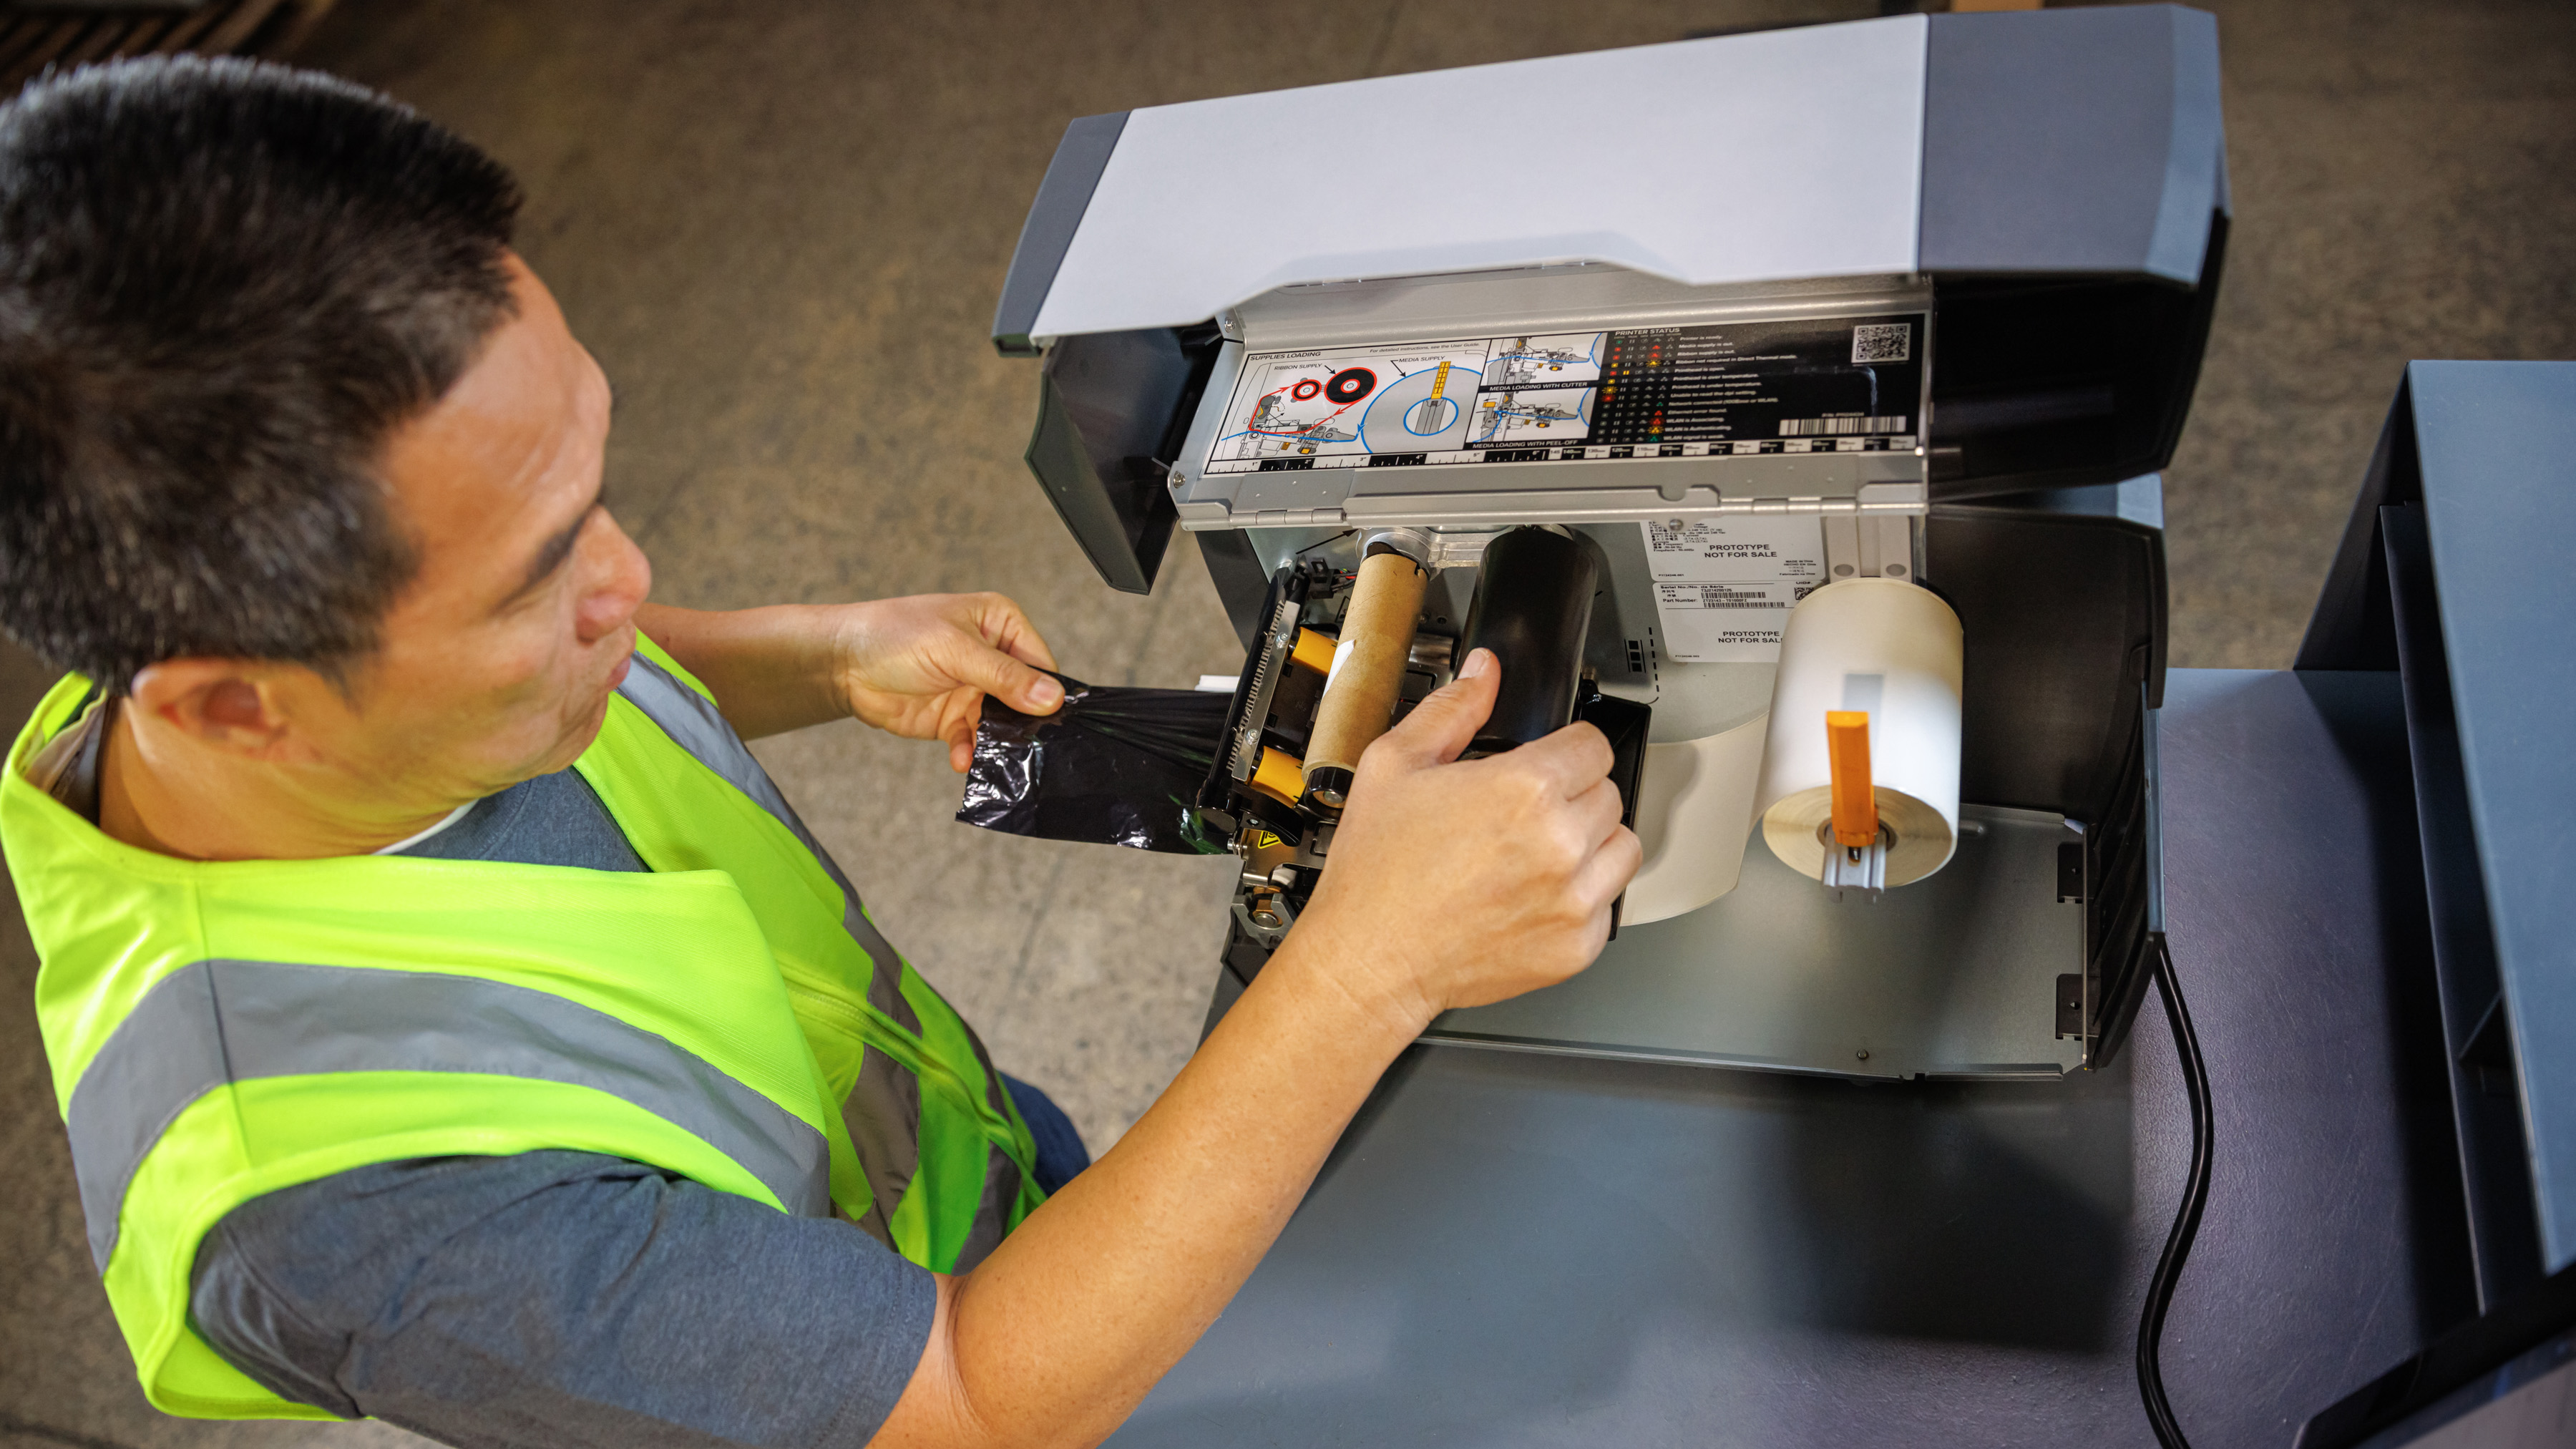 A worker loading a new label roll in a Zebra thermal printer.